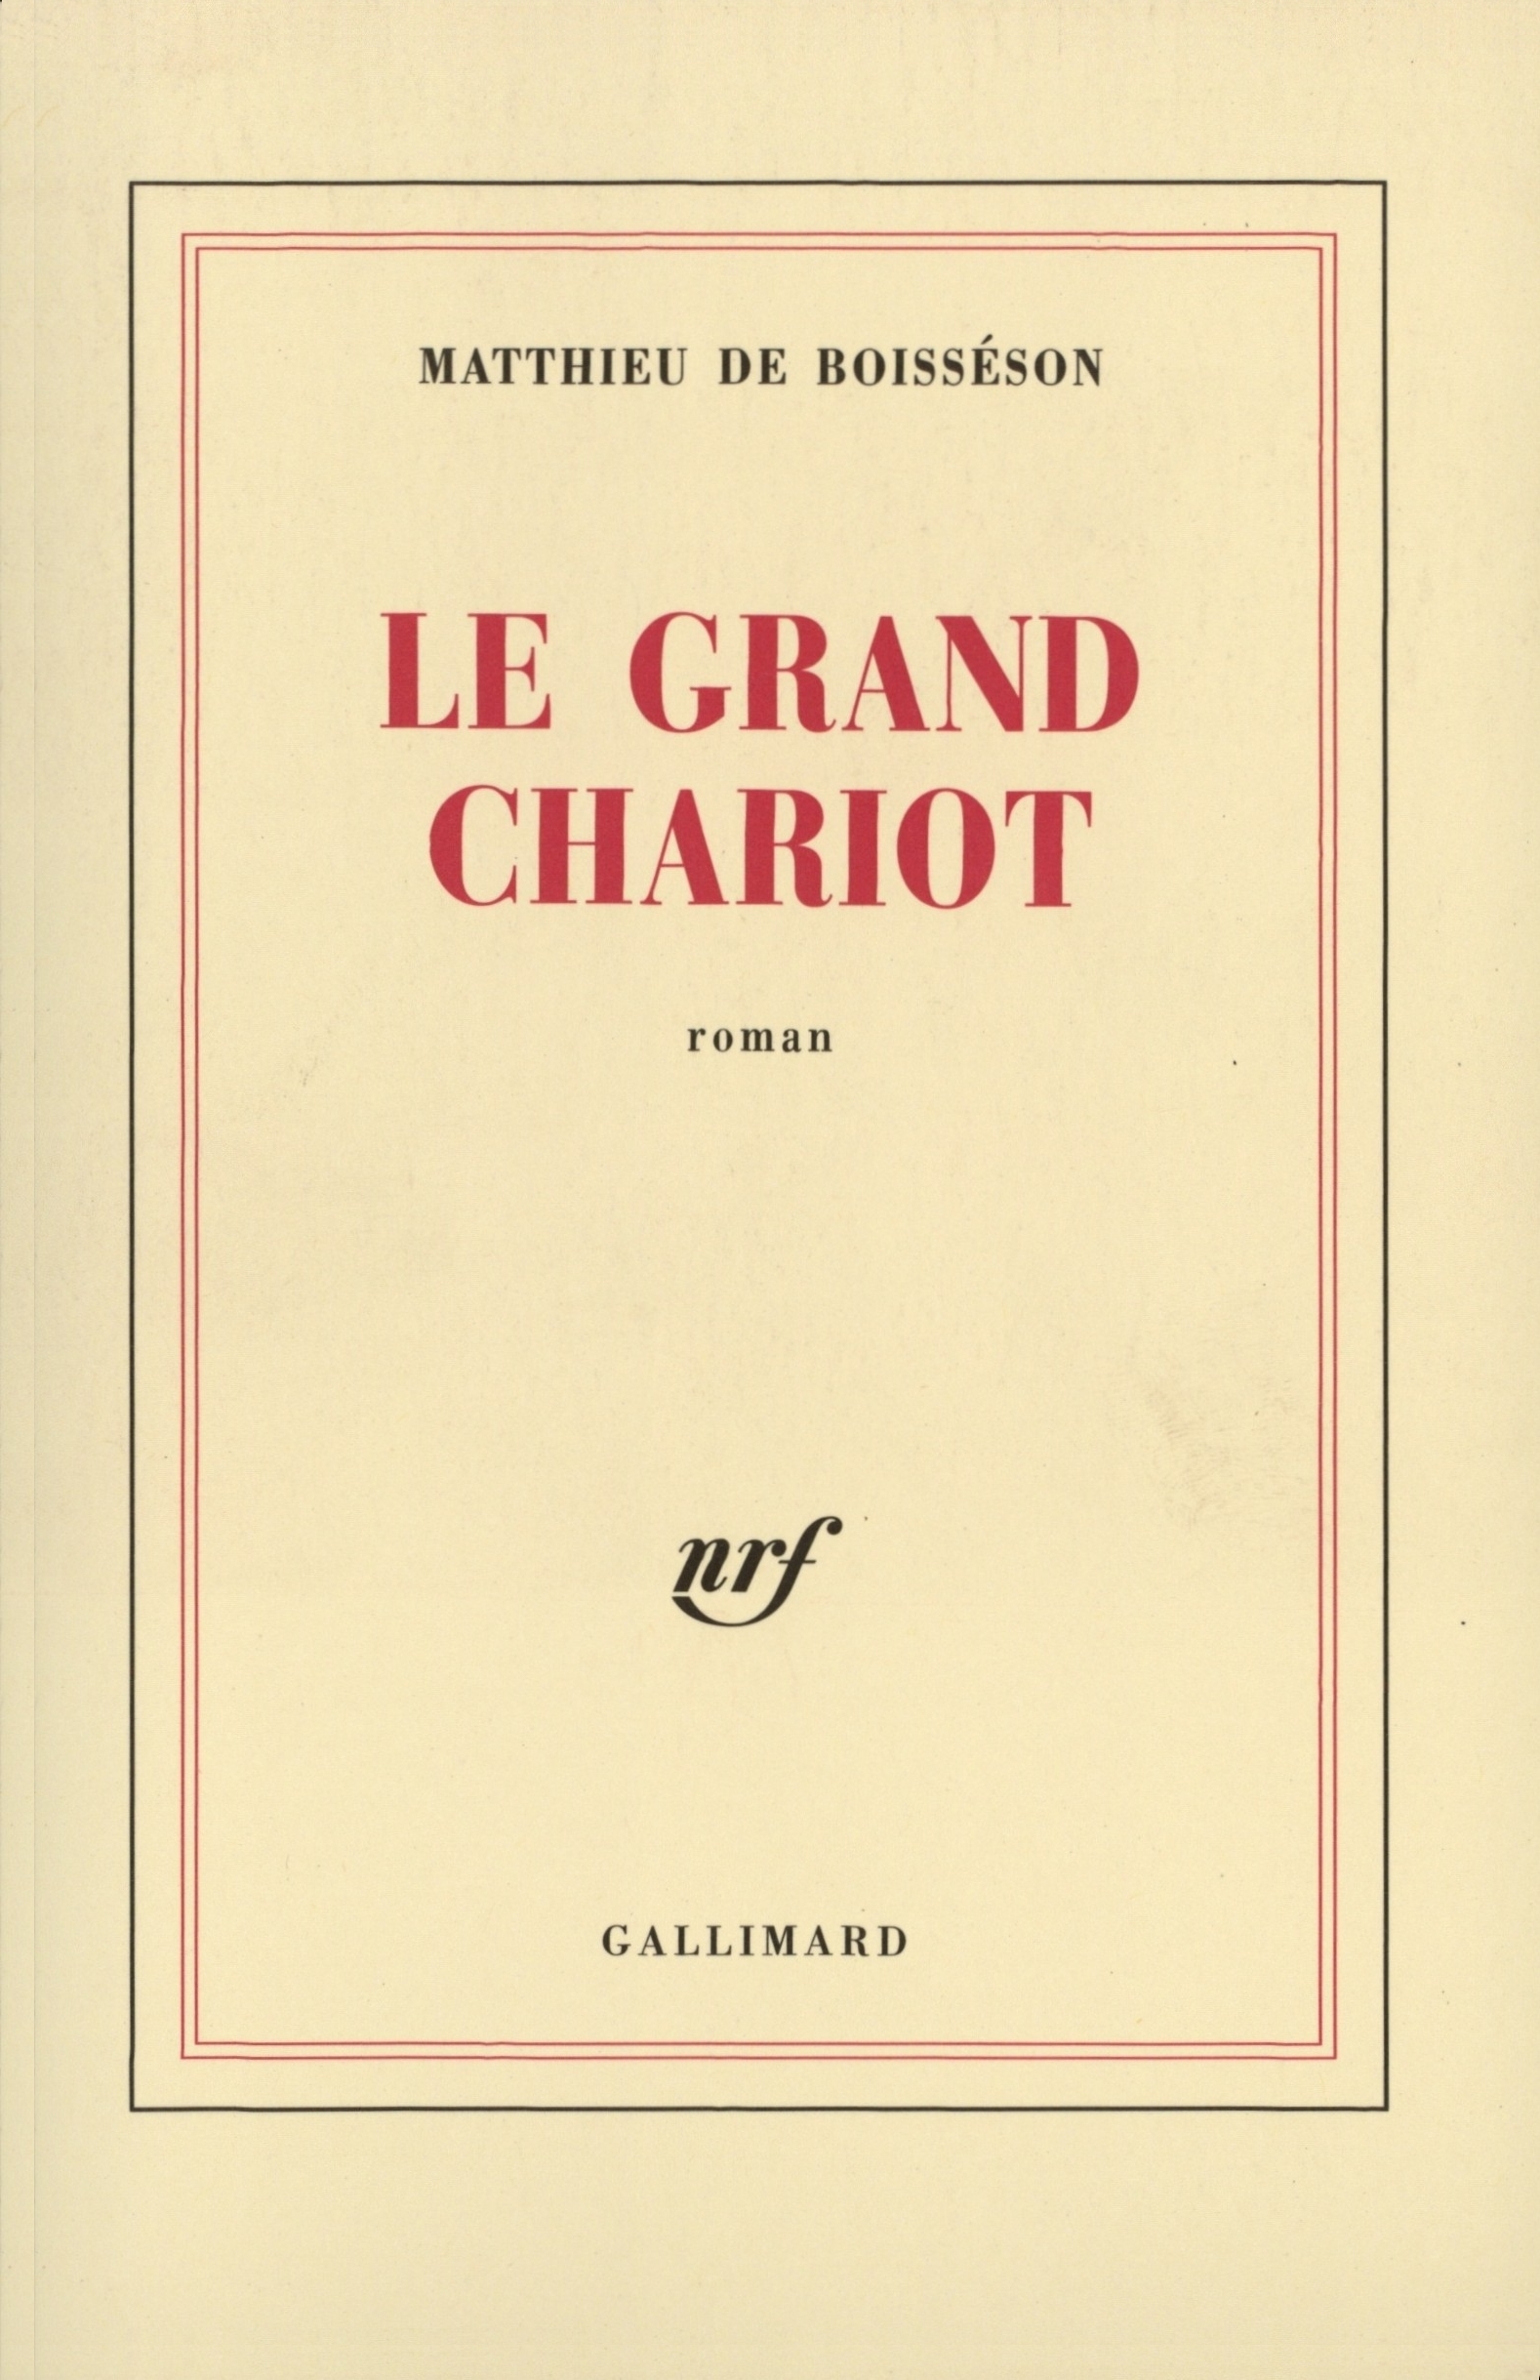 Le grand chariot roman (9782070764686-front-cover)